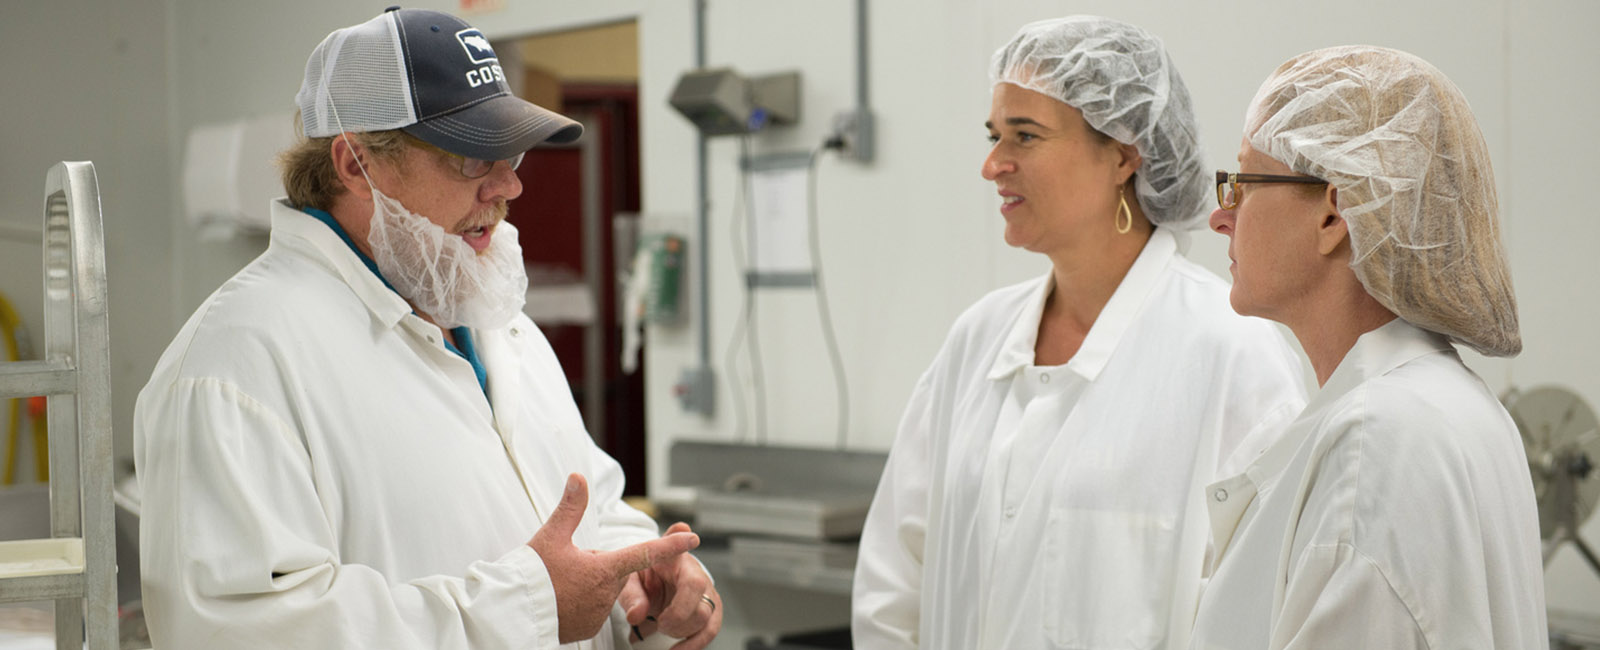 Firsthand Foods works with processors to fabricate humanely-raised meat.